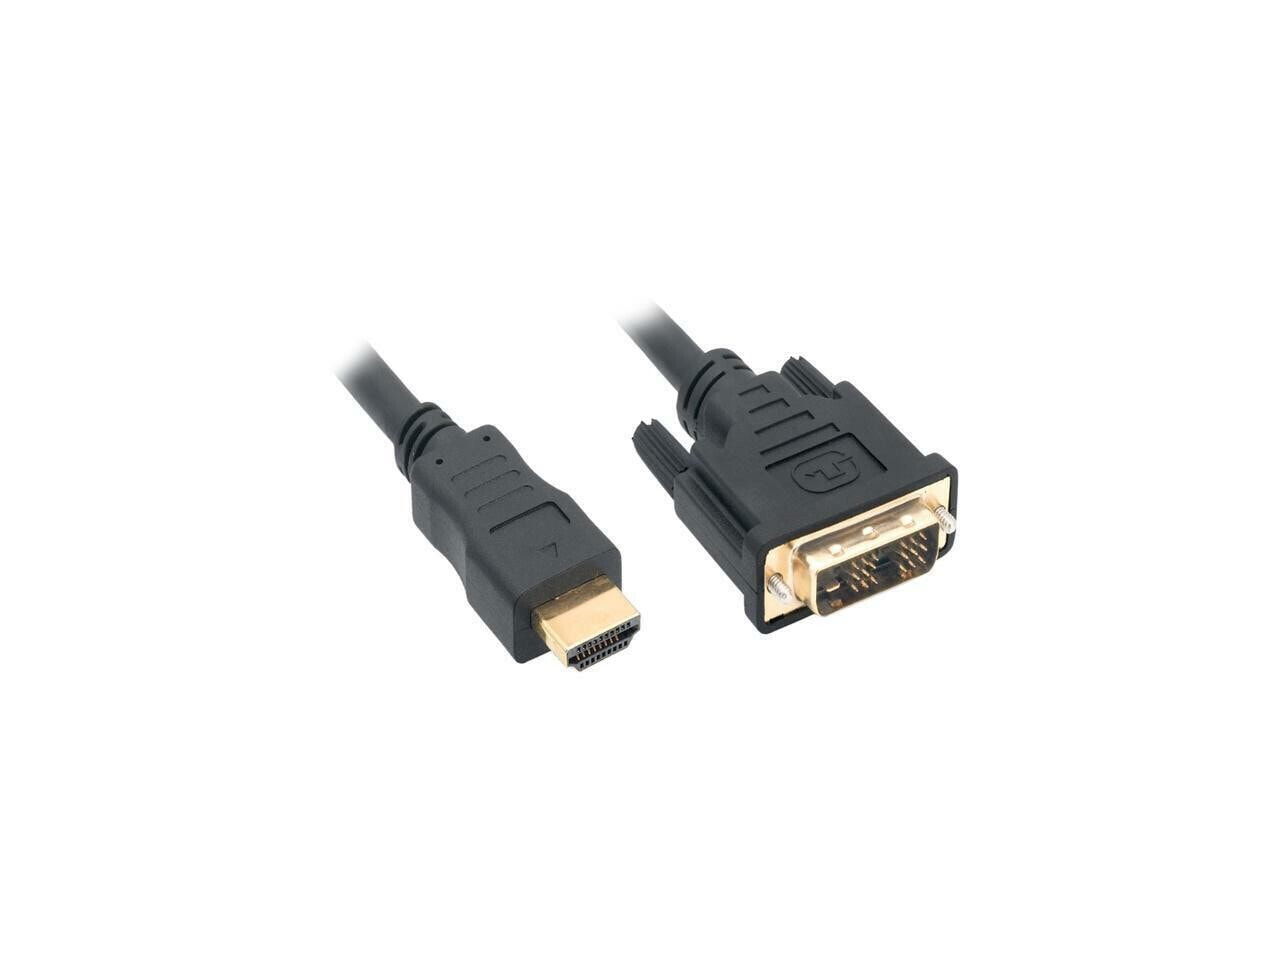 Nippon Labs DVI-3-HDMI-2P 10 ft. HDMI Male to DVI-D Adapter Cable with Gold-plat